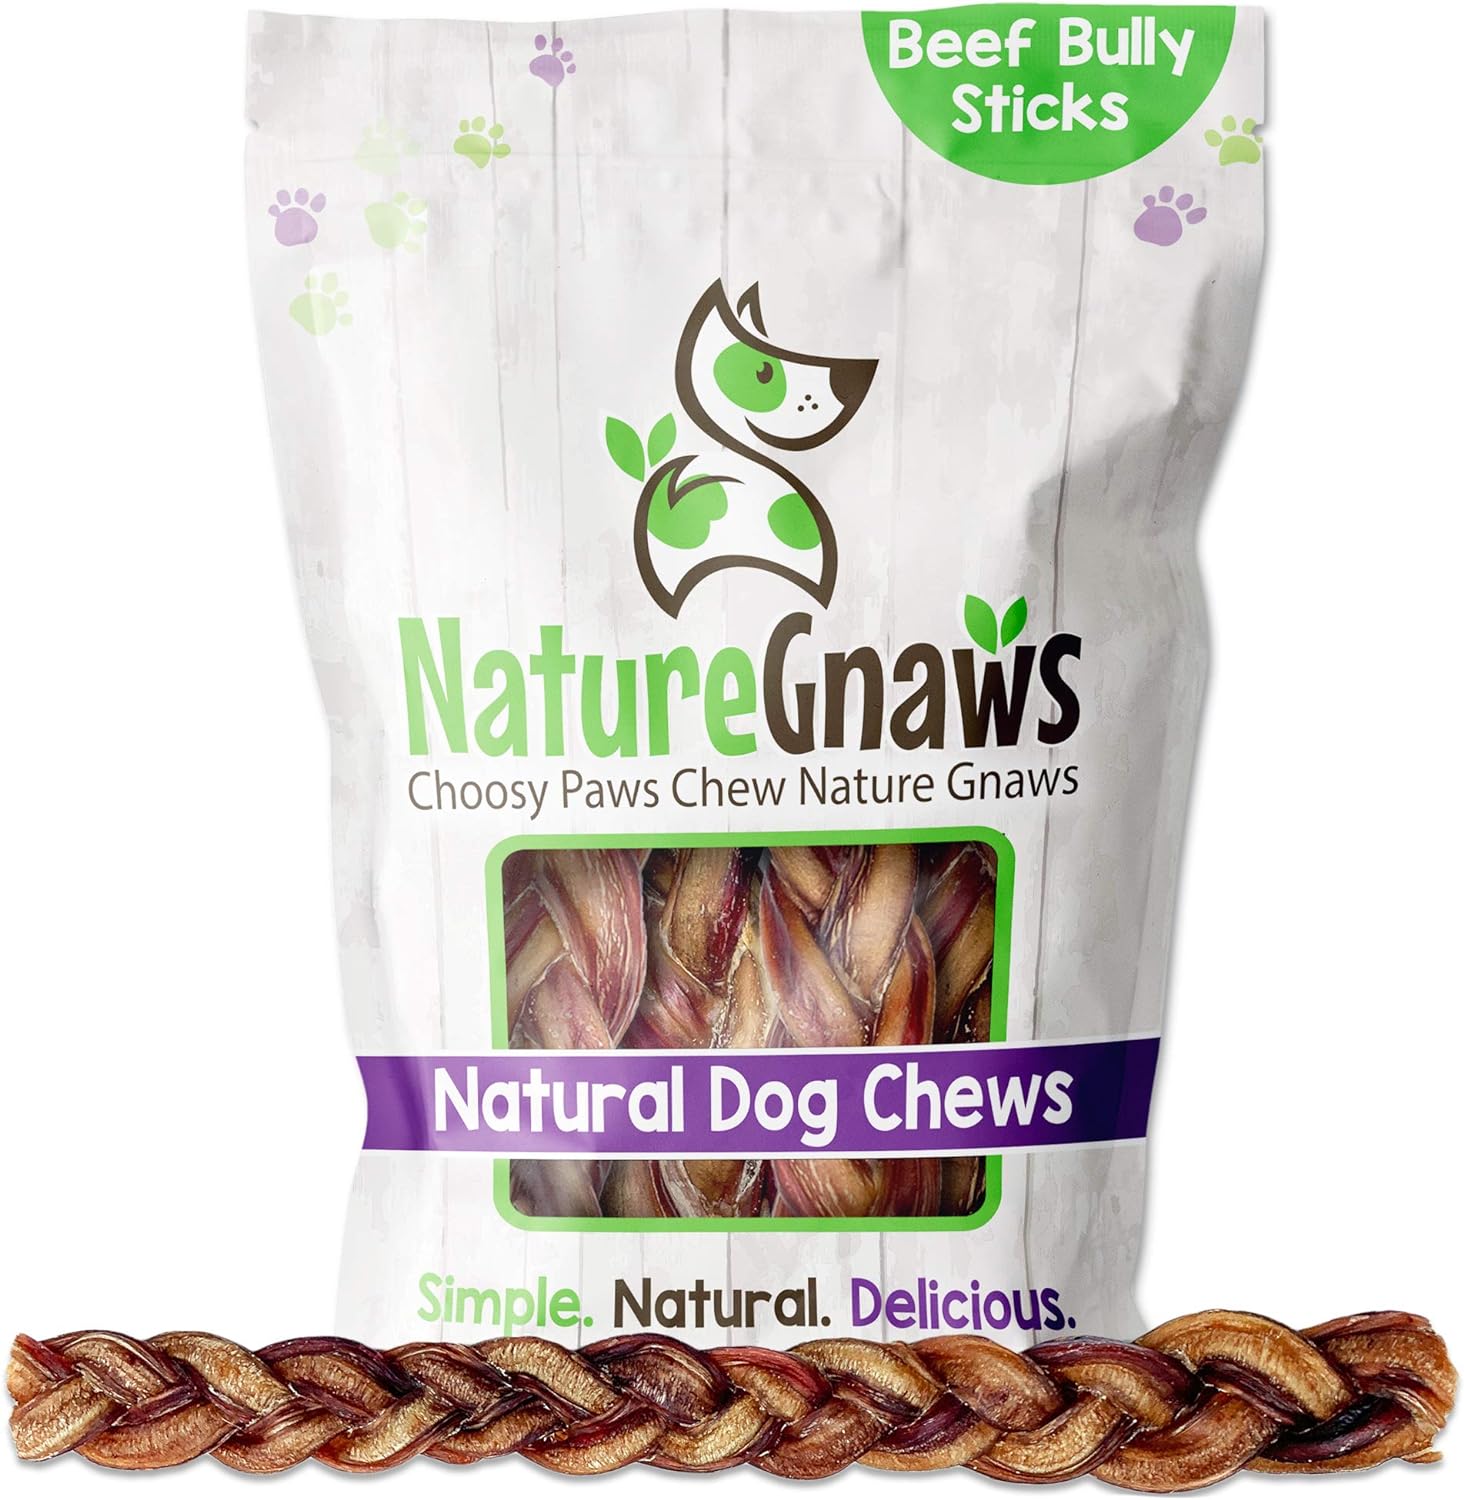 Nature Gnaws - Braided Bully Sticks for Dogs - Premium Natural Beef Dental Bones - Long Lasting Dog Chew Treats for Aggressive Chewers - Rawhide Free - 12 Inches